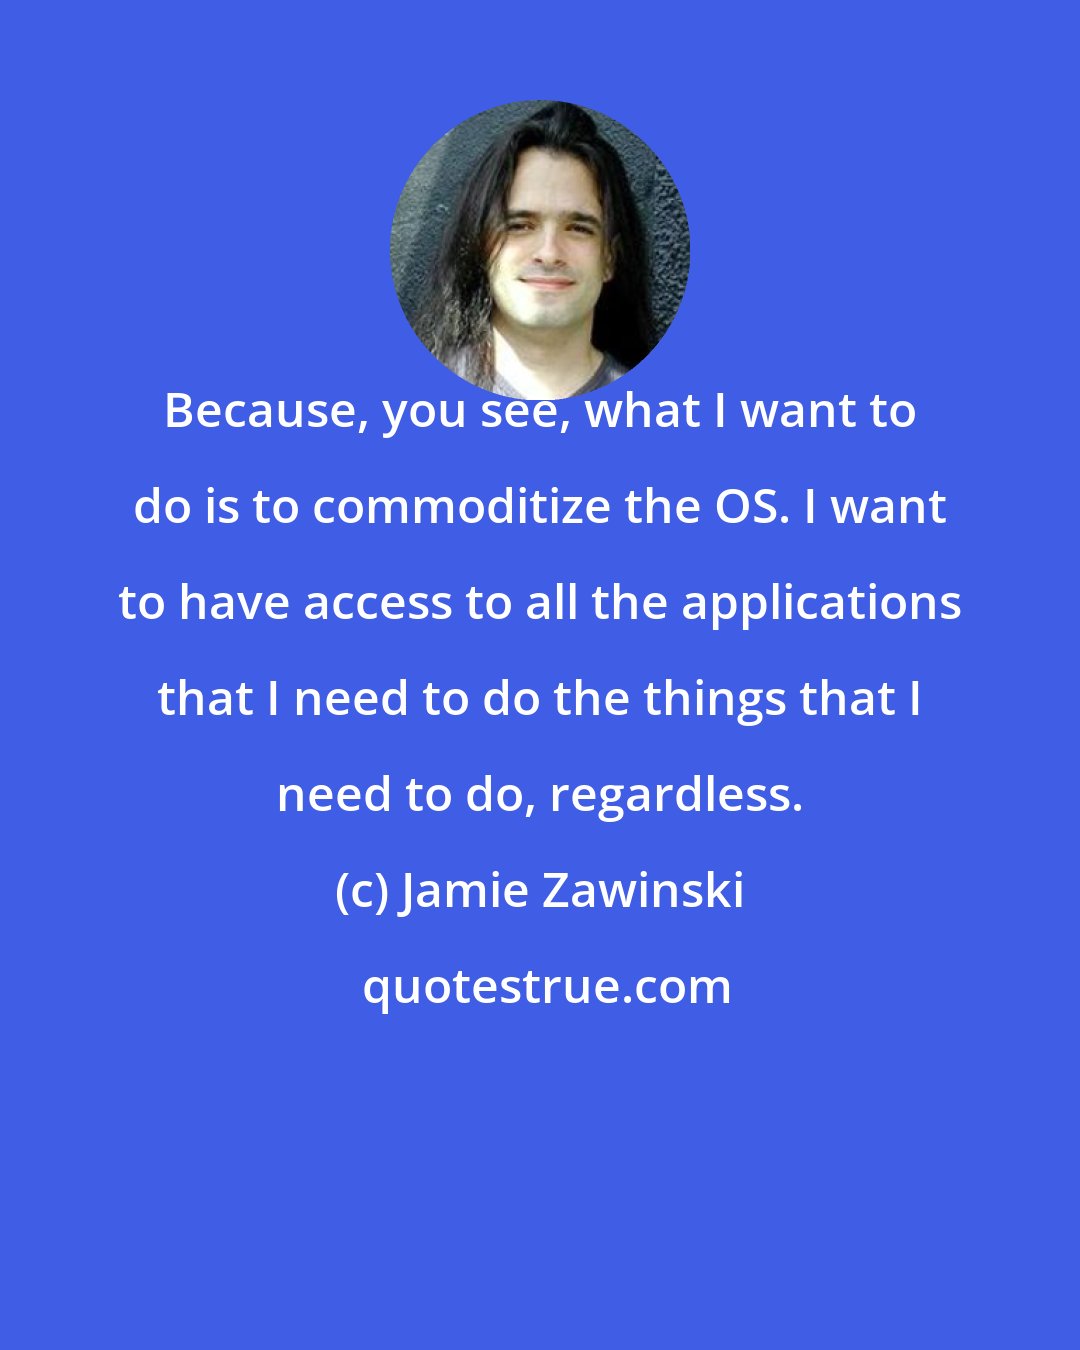 Jamie Zawinski: Because, you see, what I want to do is to commoditize the OS. I want to have access to all the applications that I need to do the things that I need to do, regardless.